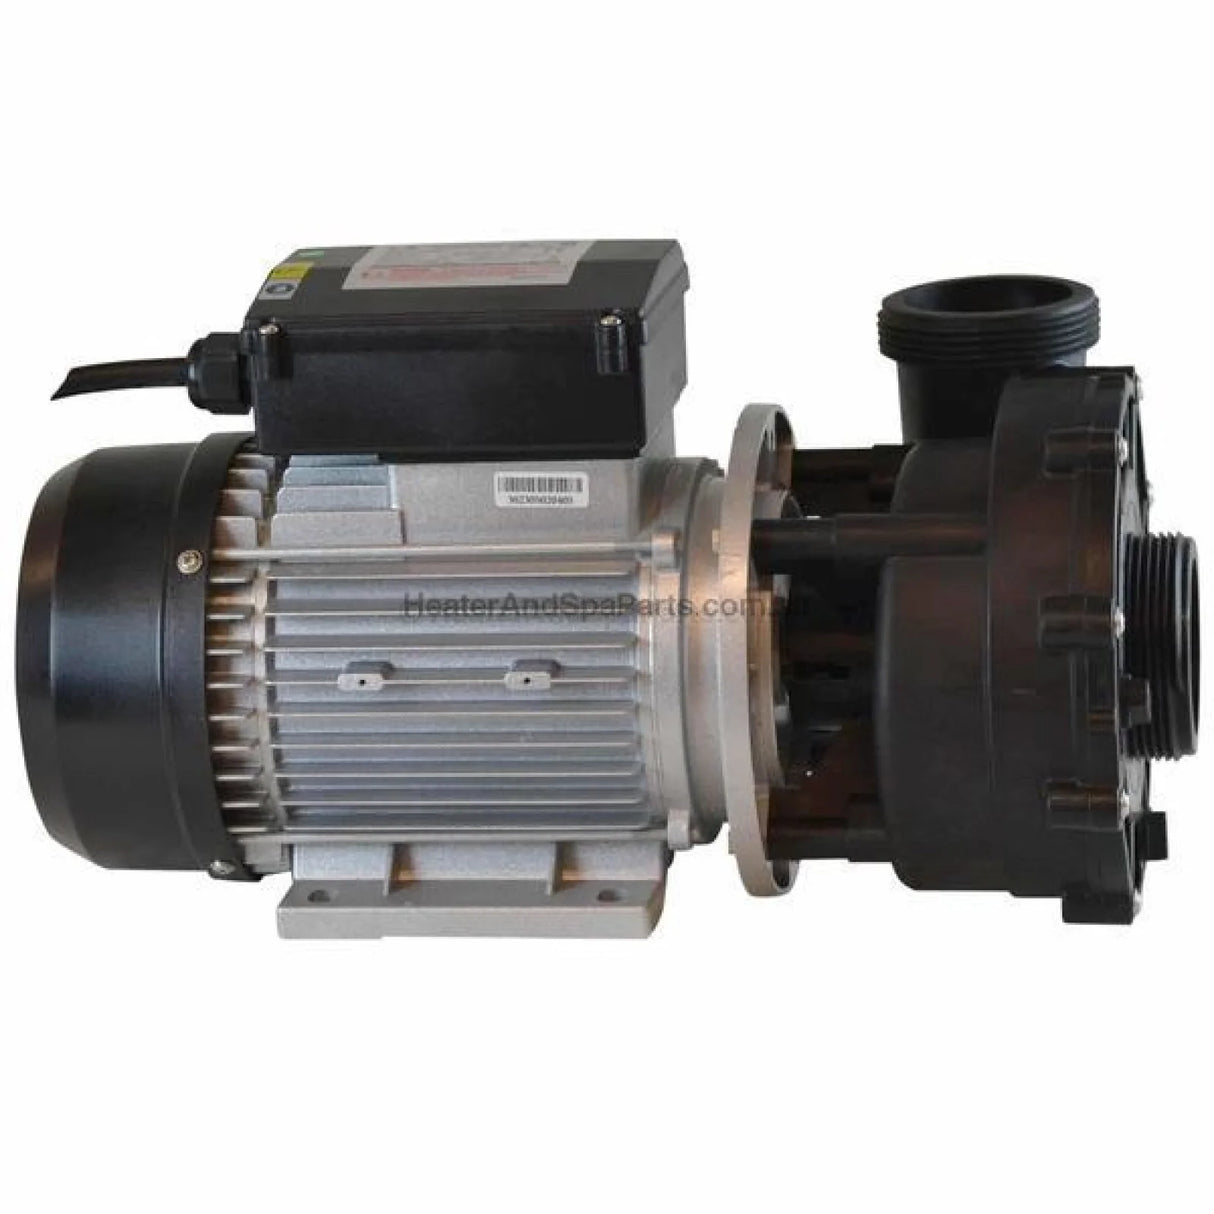 Universal Spa Jet Pump - Two-speed - WP200-II 2.0HP - LX Whirlpool - Heater and Spa Parts